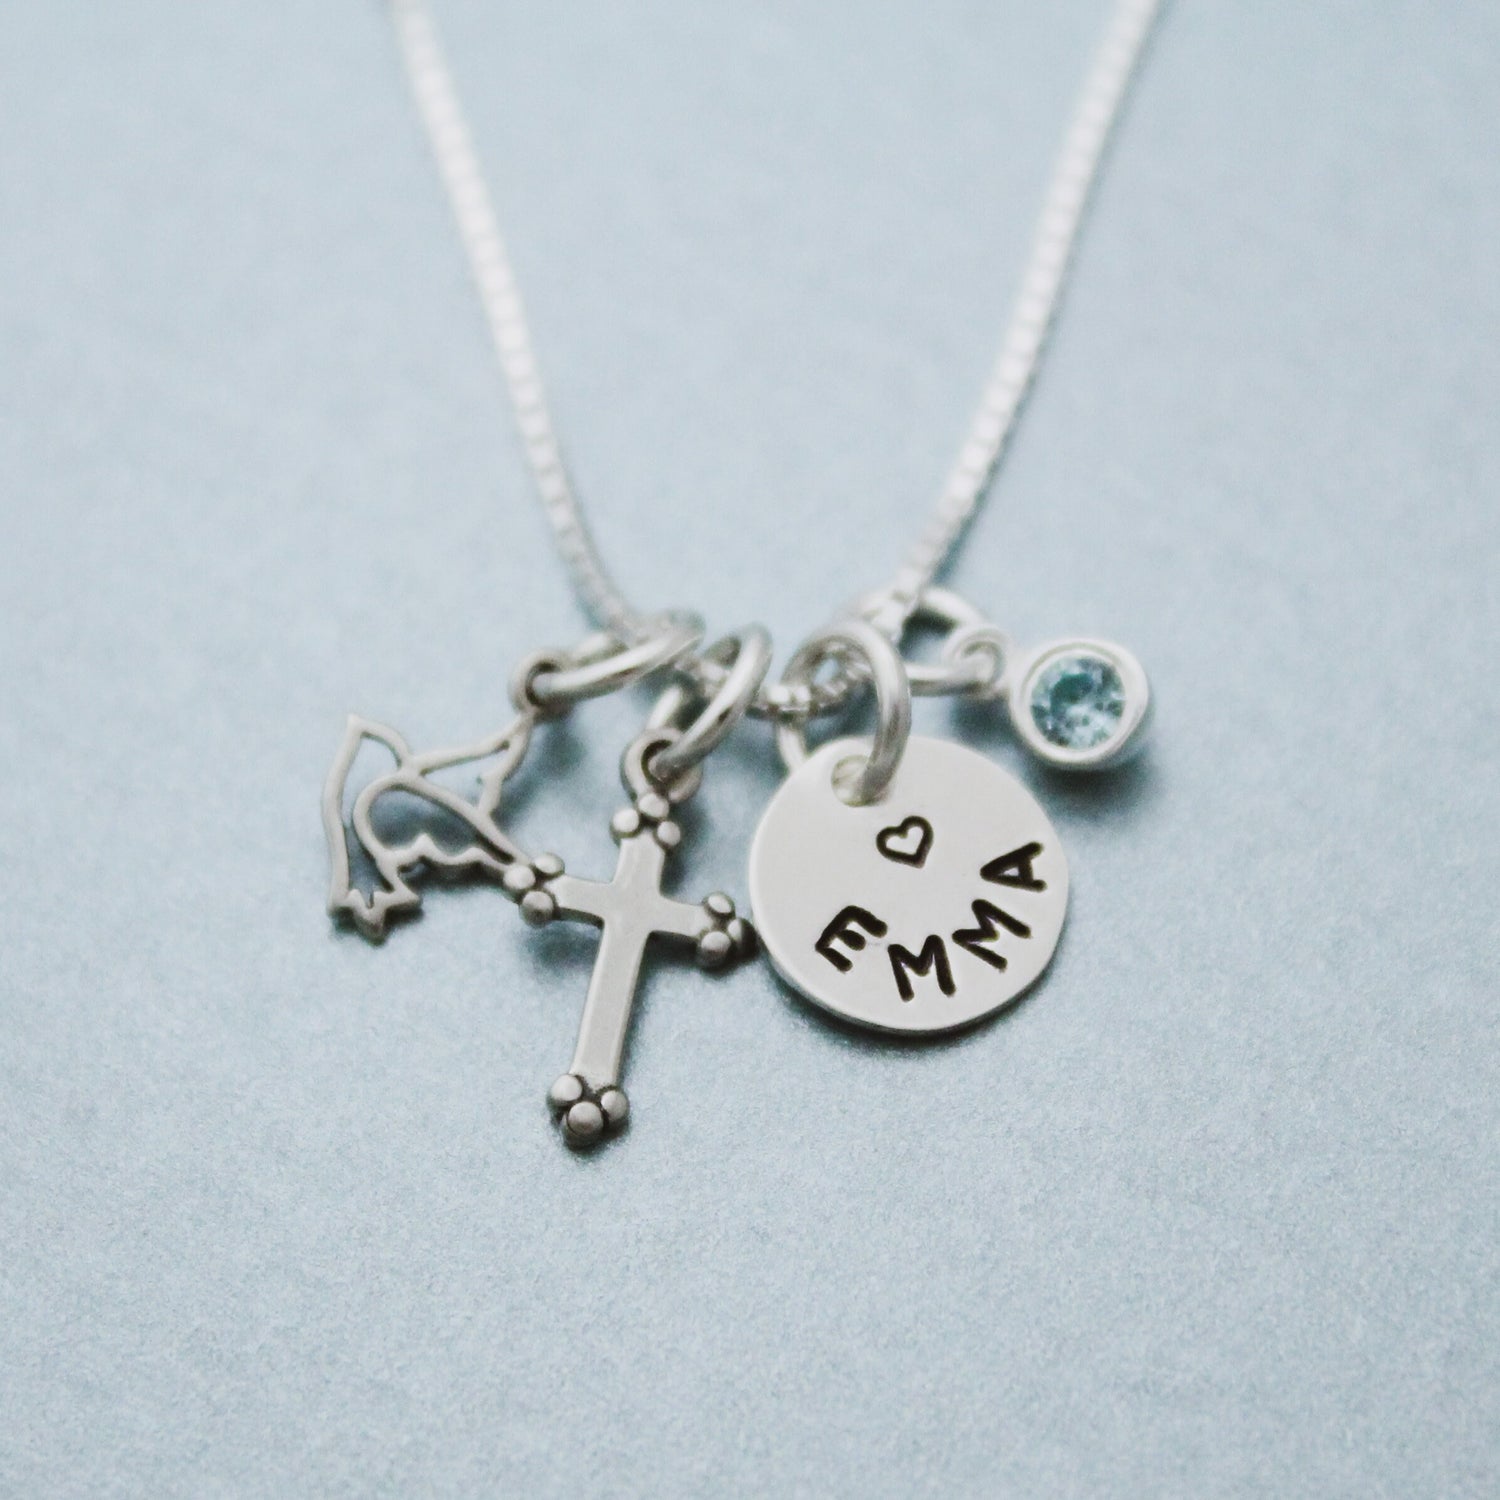 Tiny Personalized Cross Charm Necklace in Sterling Silver, Confirmation Cross Necklace, First Communion Cross Necklace, Hand Stamped Jewelry